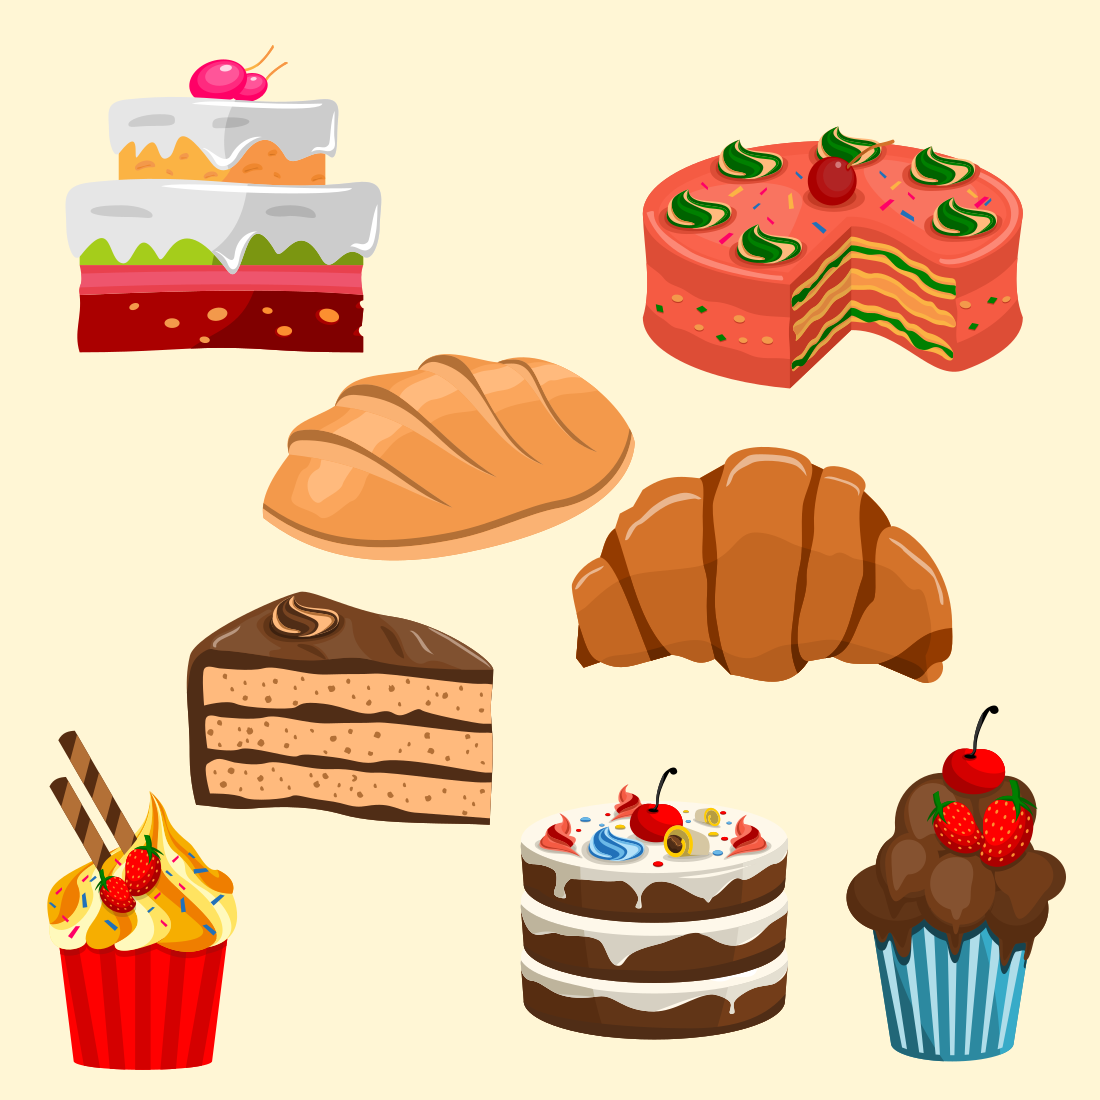 Breads and Cakes Vector Graphic Illustration cover image.